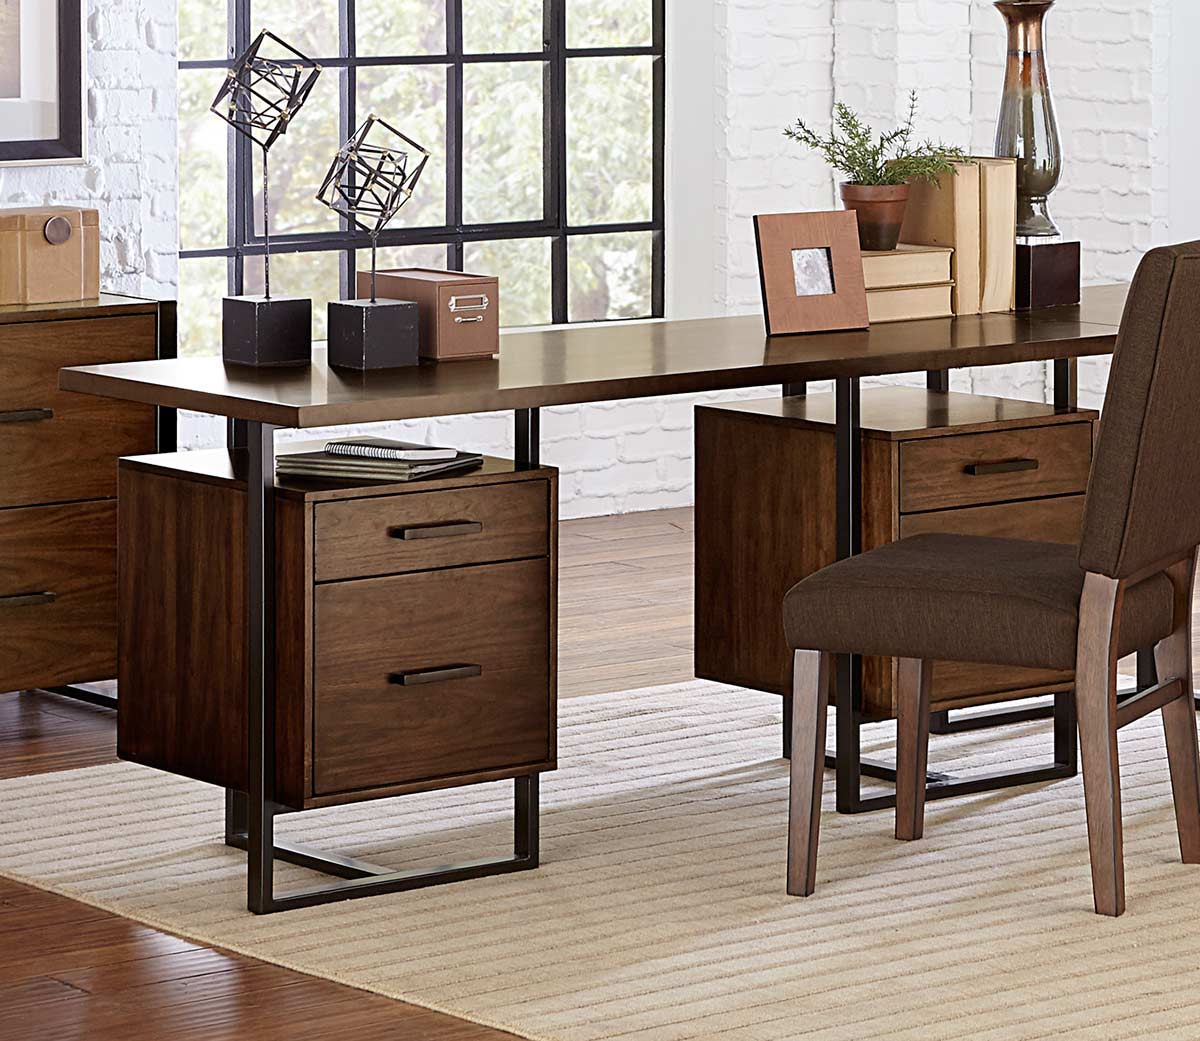 Homelegance Sedley Writing Desk with Two Cabinets - Walnut